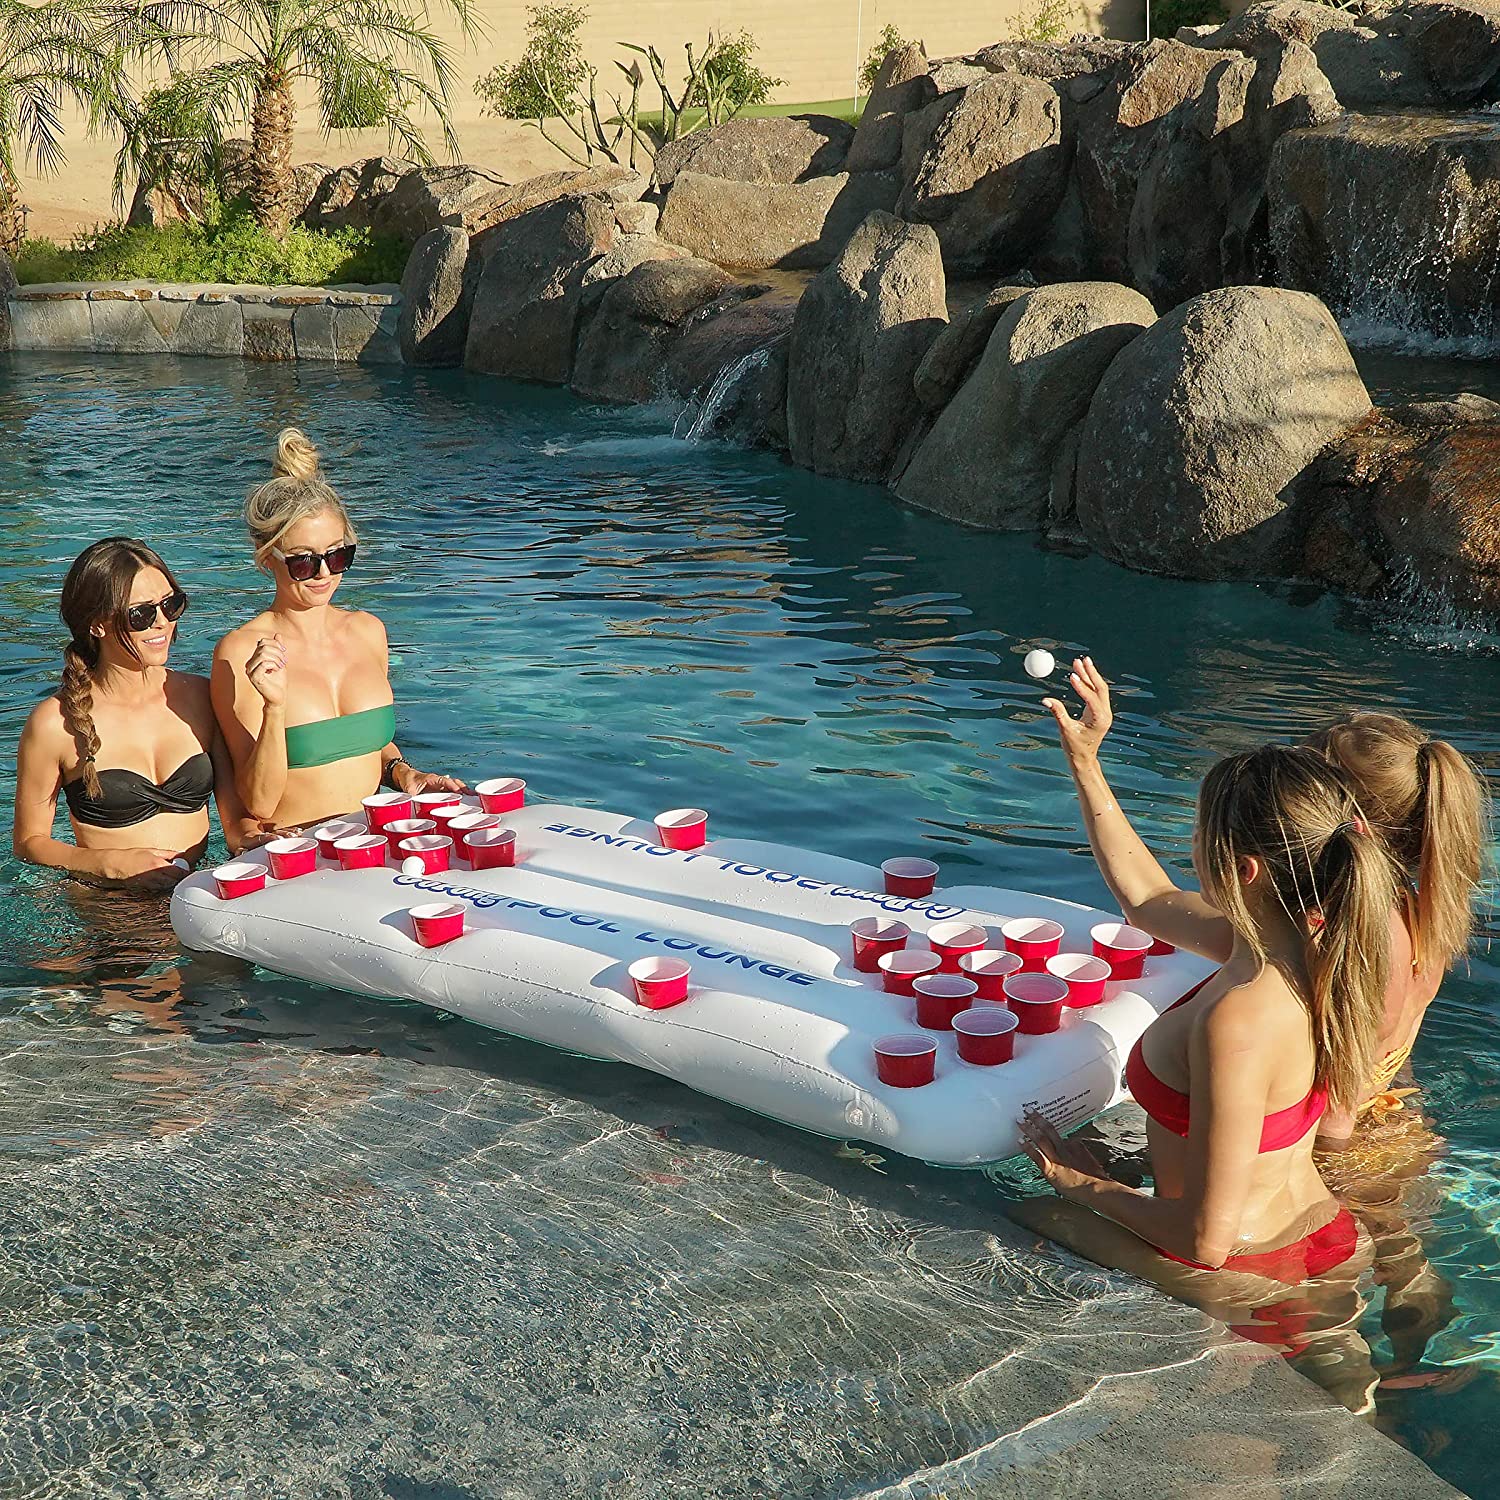 Group of Girls Playing Inflatable Floating Beer Pong Table in Lake